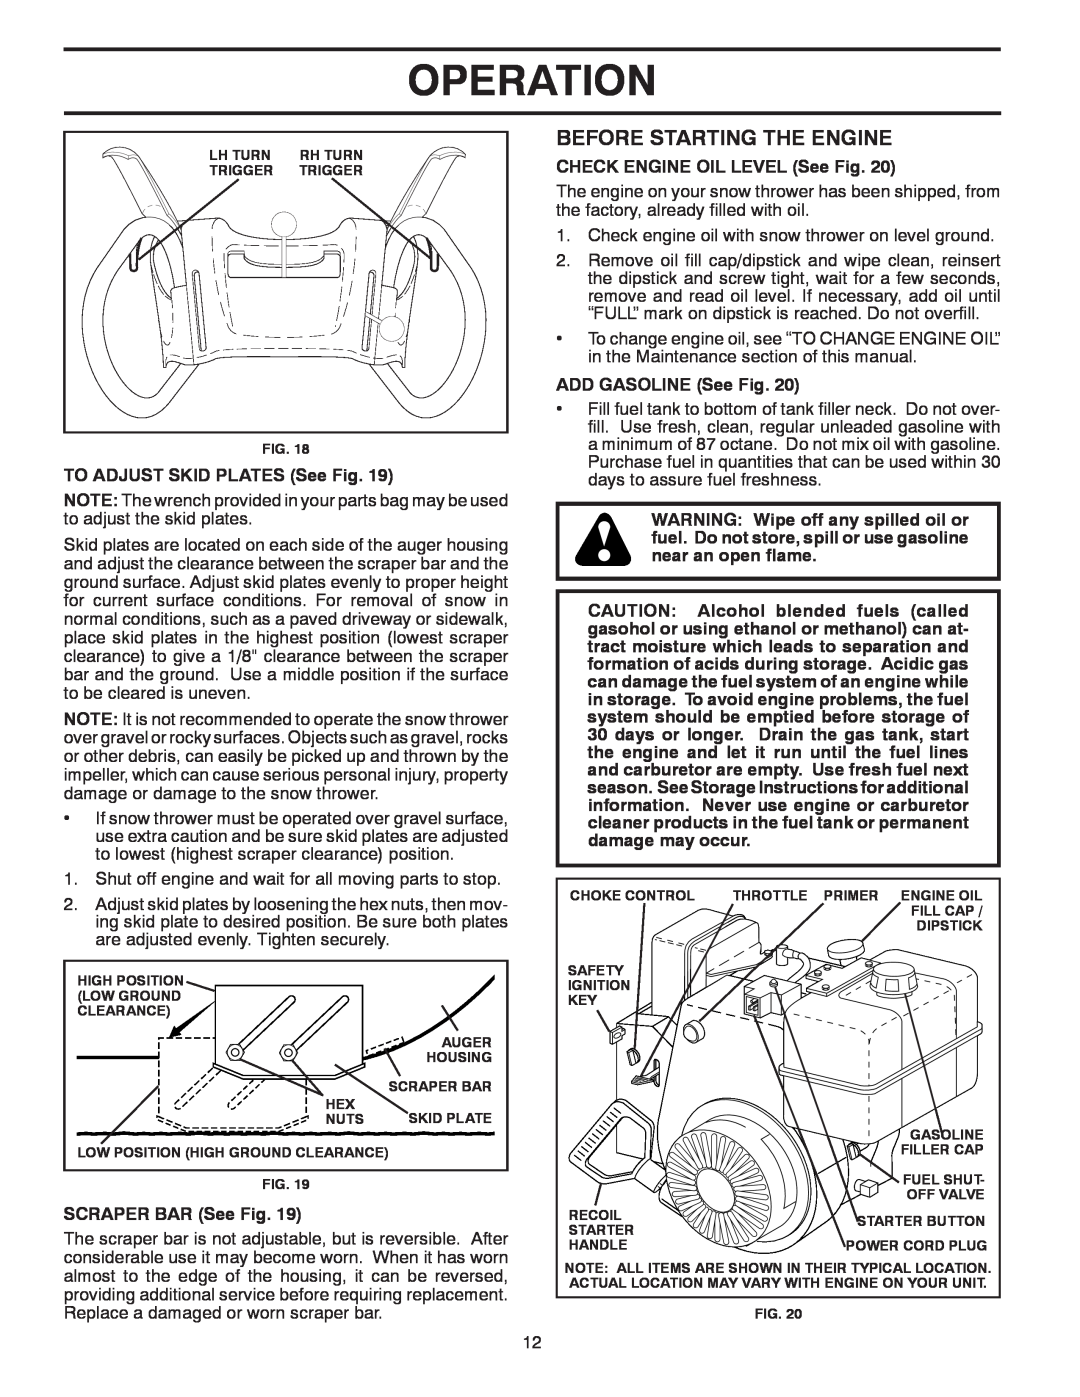 Poulan 414949 owner manual Before Starting The Engine, Operation, CHECK ENGINE OIL LEVEL See Fig, ADD GASOLINE See Fig 